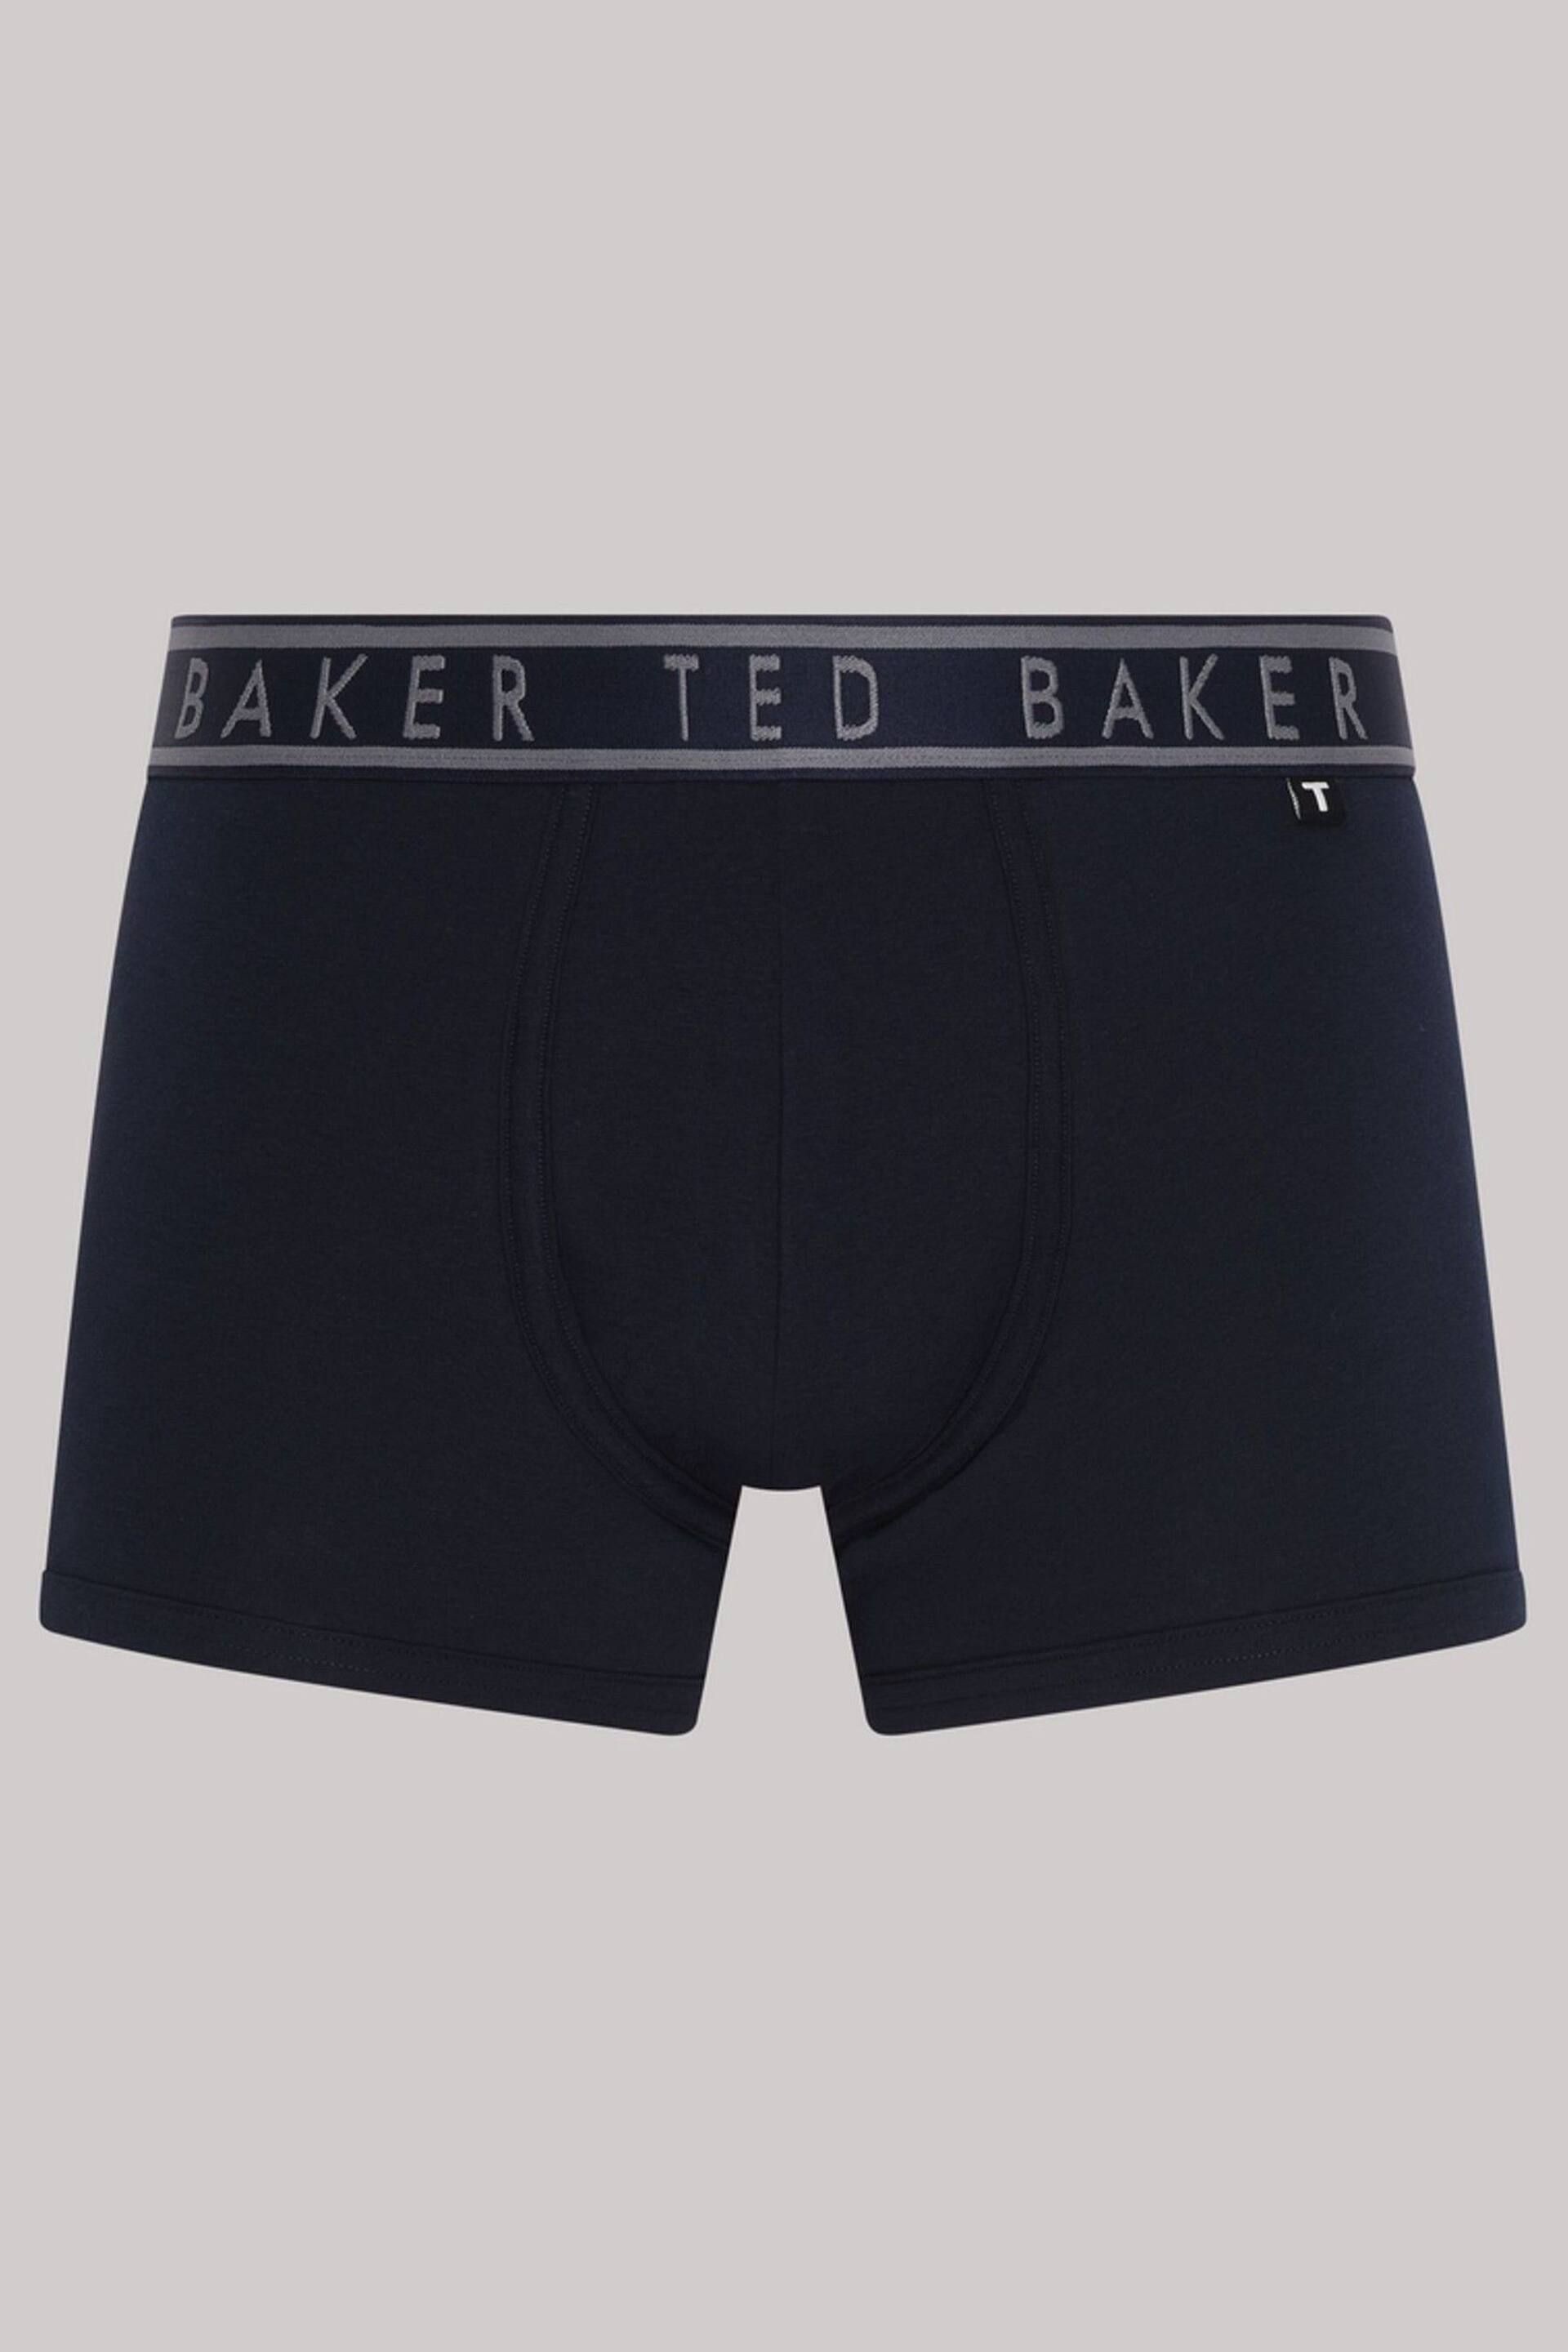 Ted Baker Blue Cotton Trunks 3 Pack - Image 4 of 6